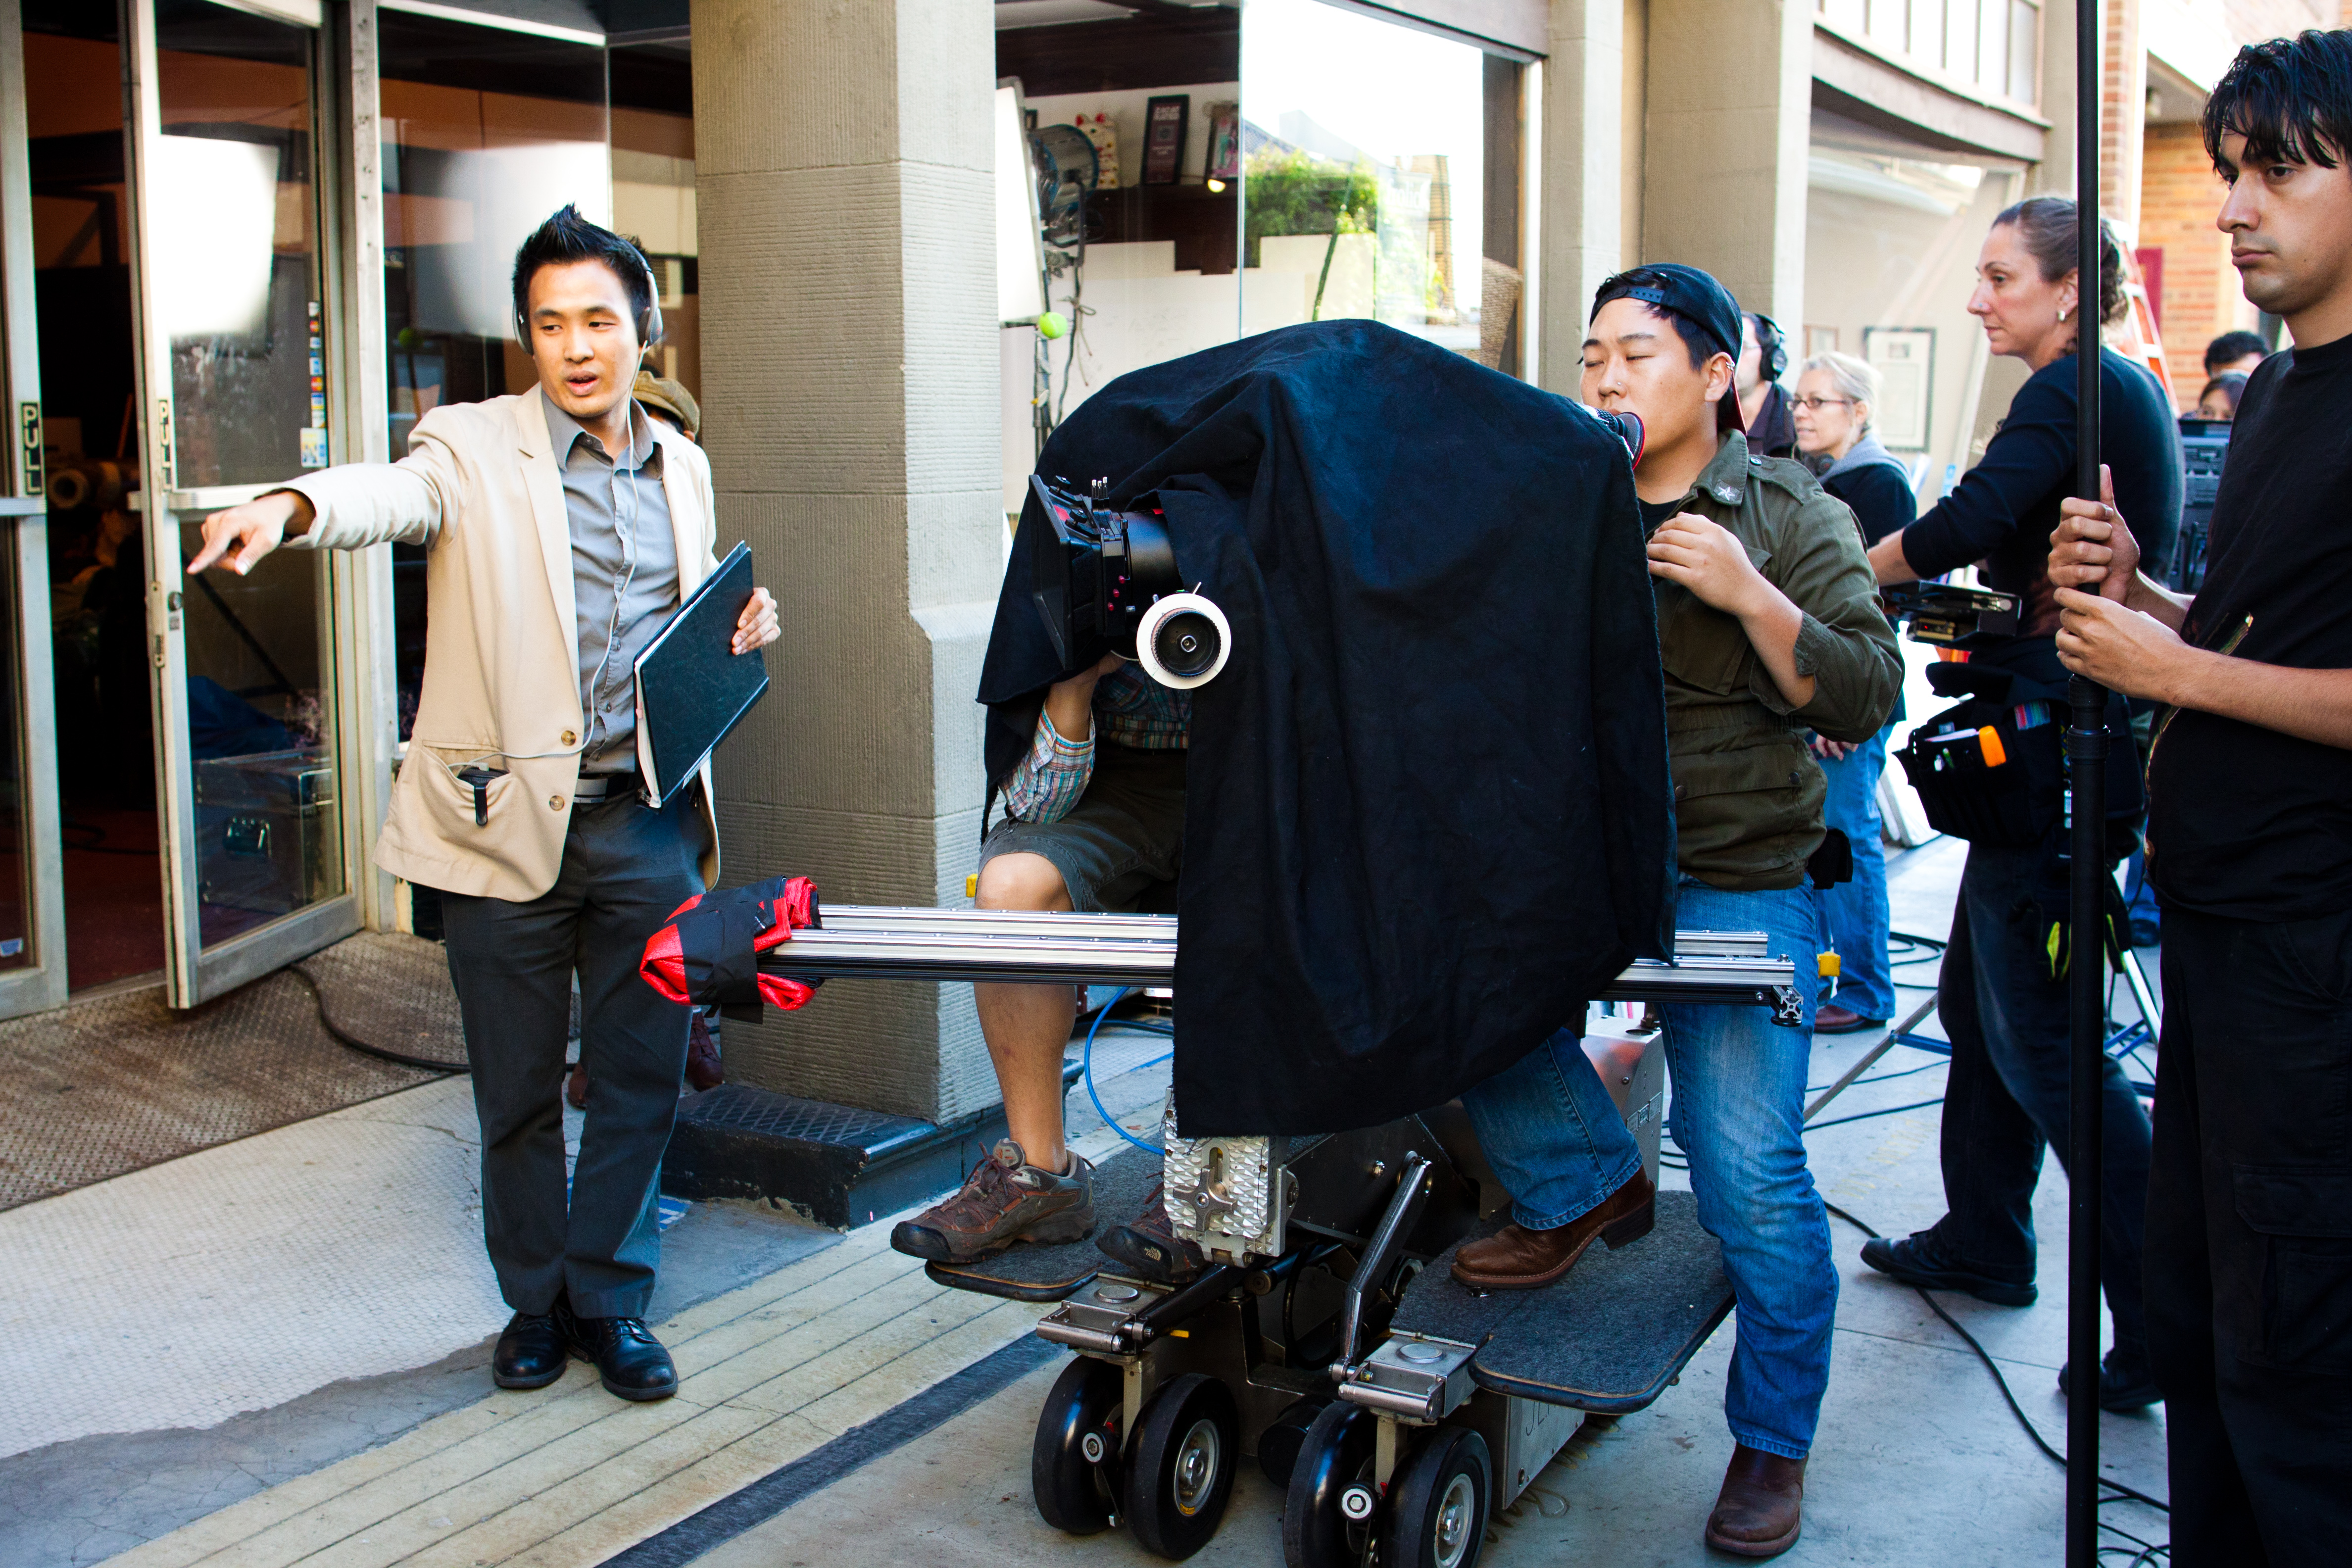 Director Jeffrey Gee Chin on 1st Street Little Tokyo with his crew.